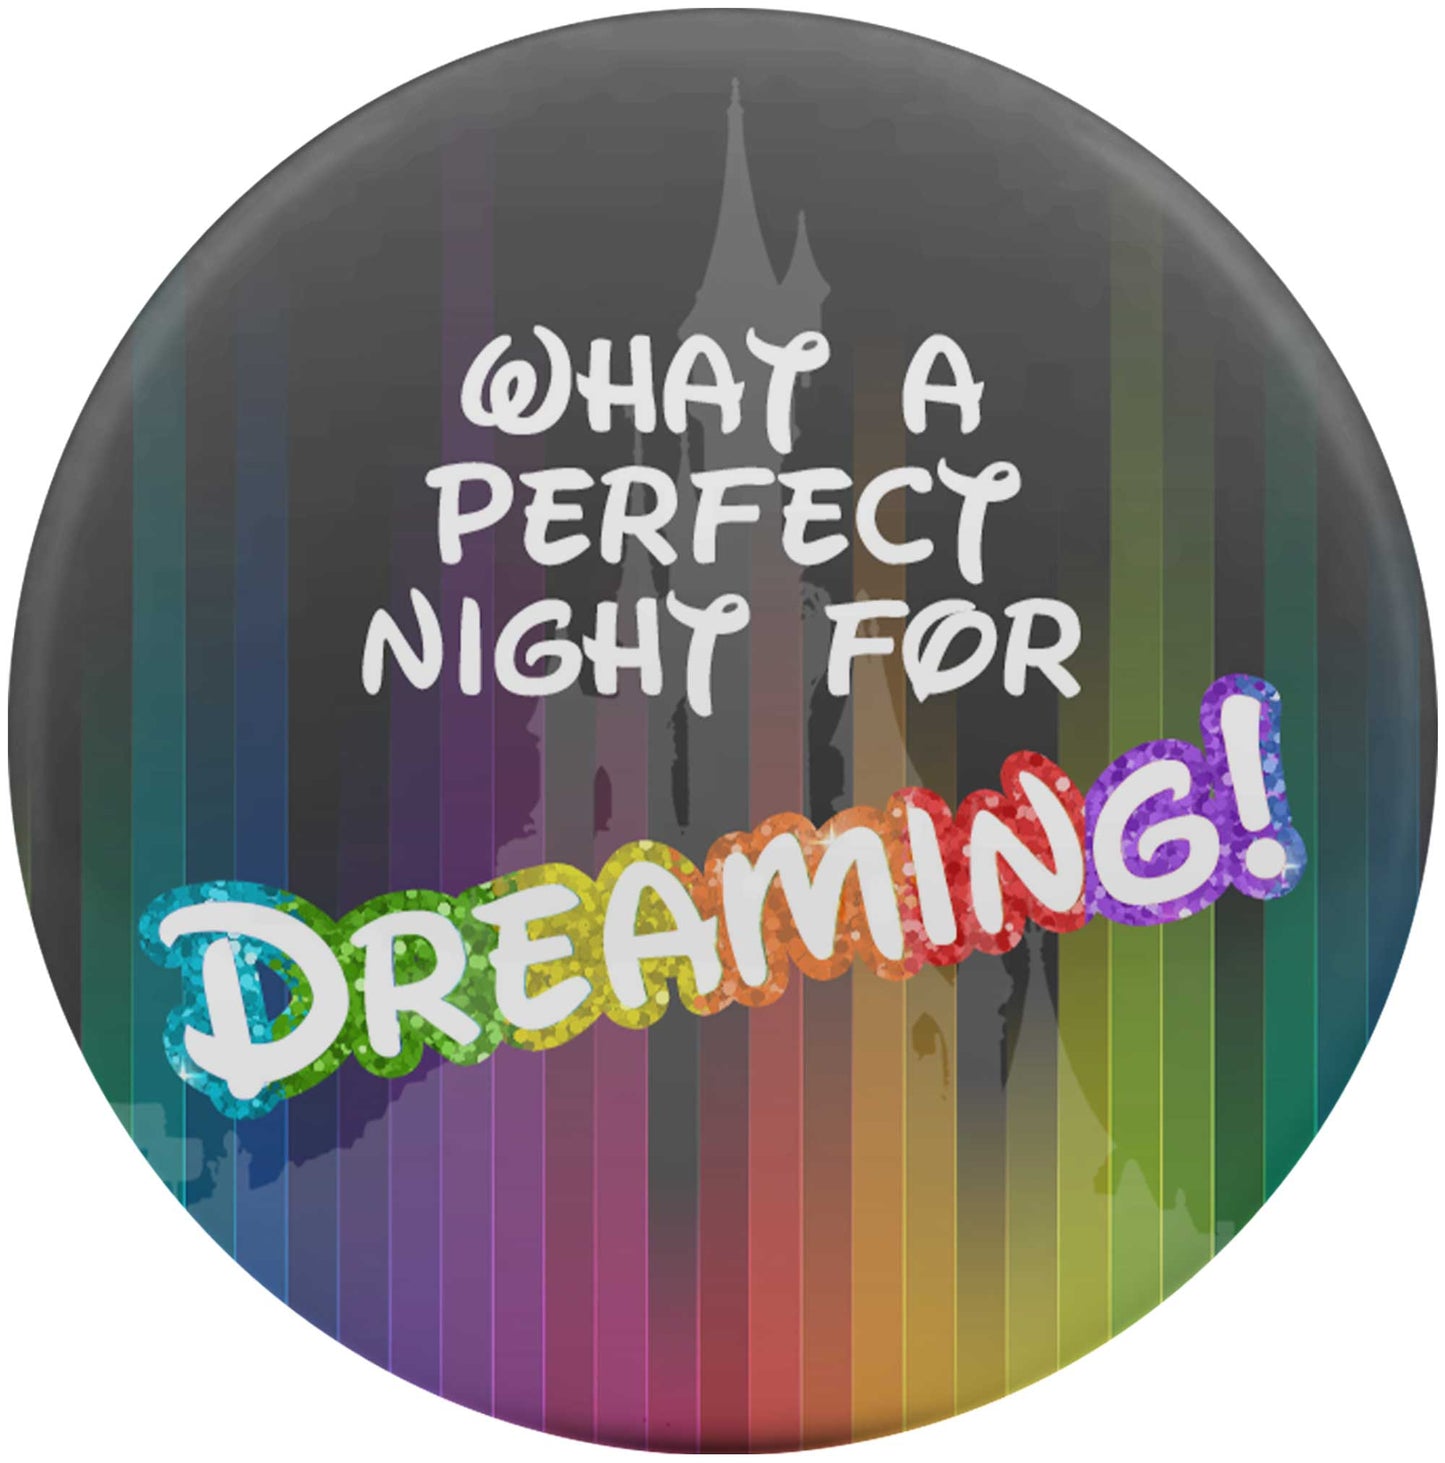 What A Perfect Night For Dreaming!